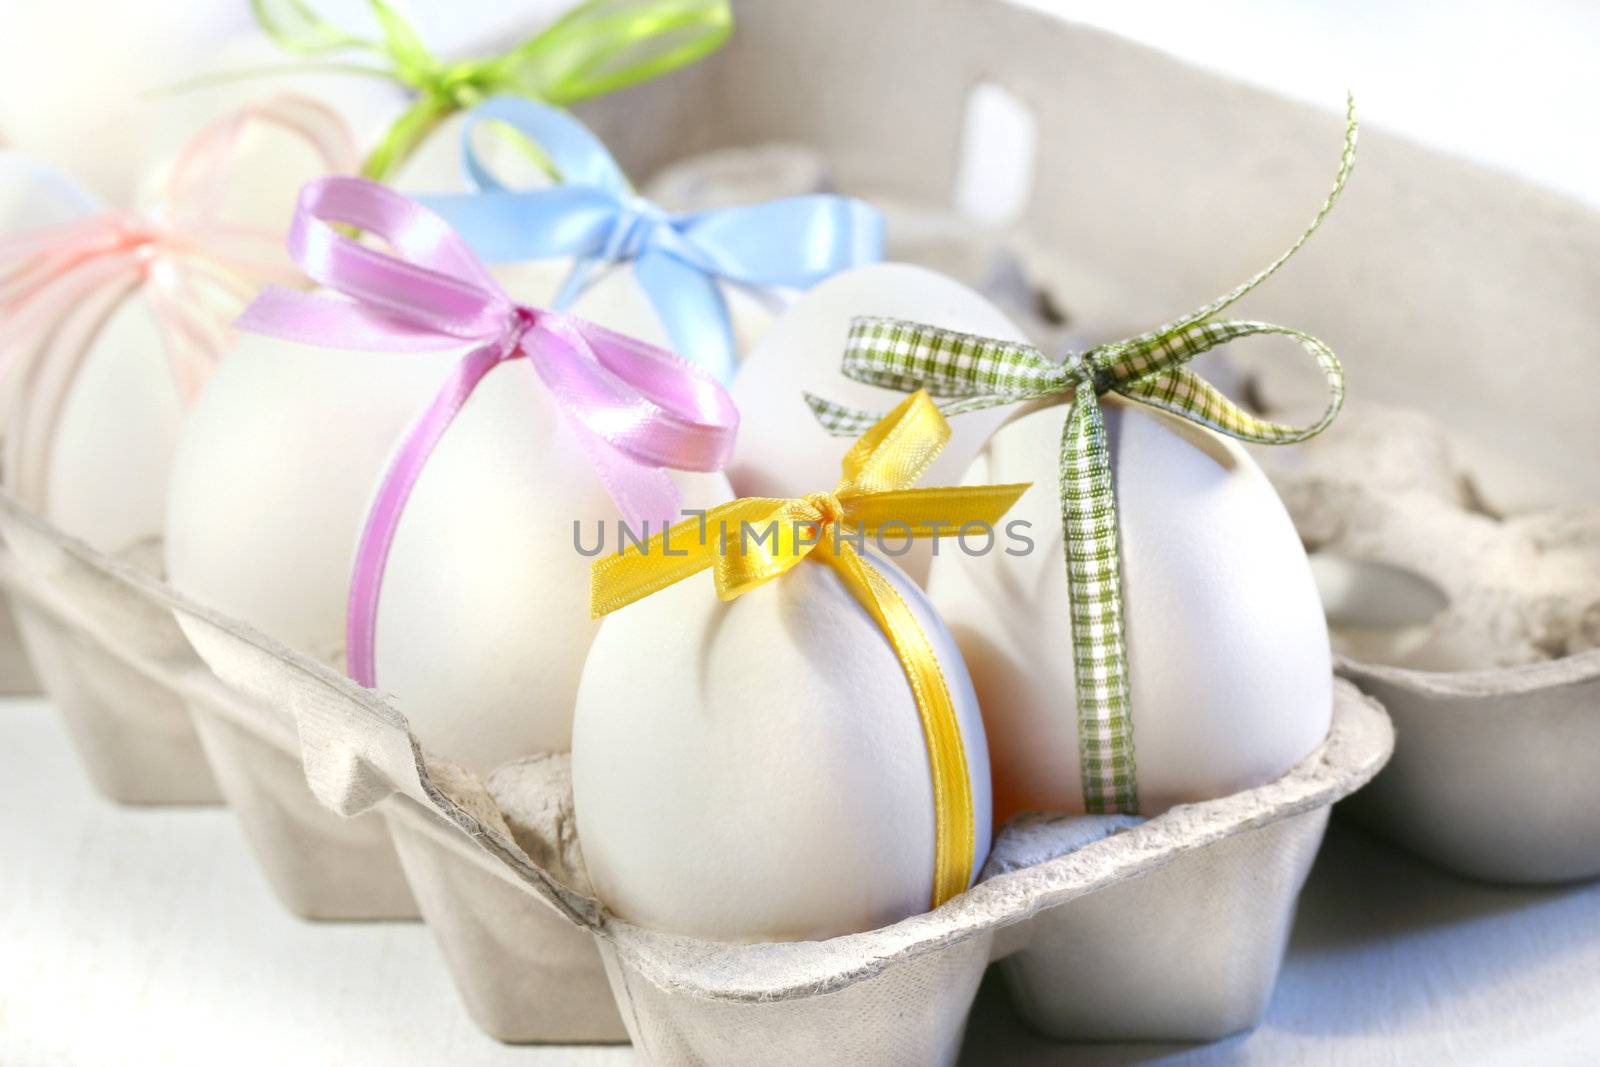 White eggs with colored ribbons  by Sandralise